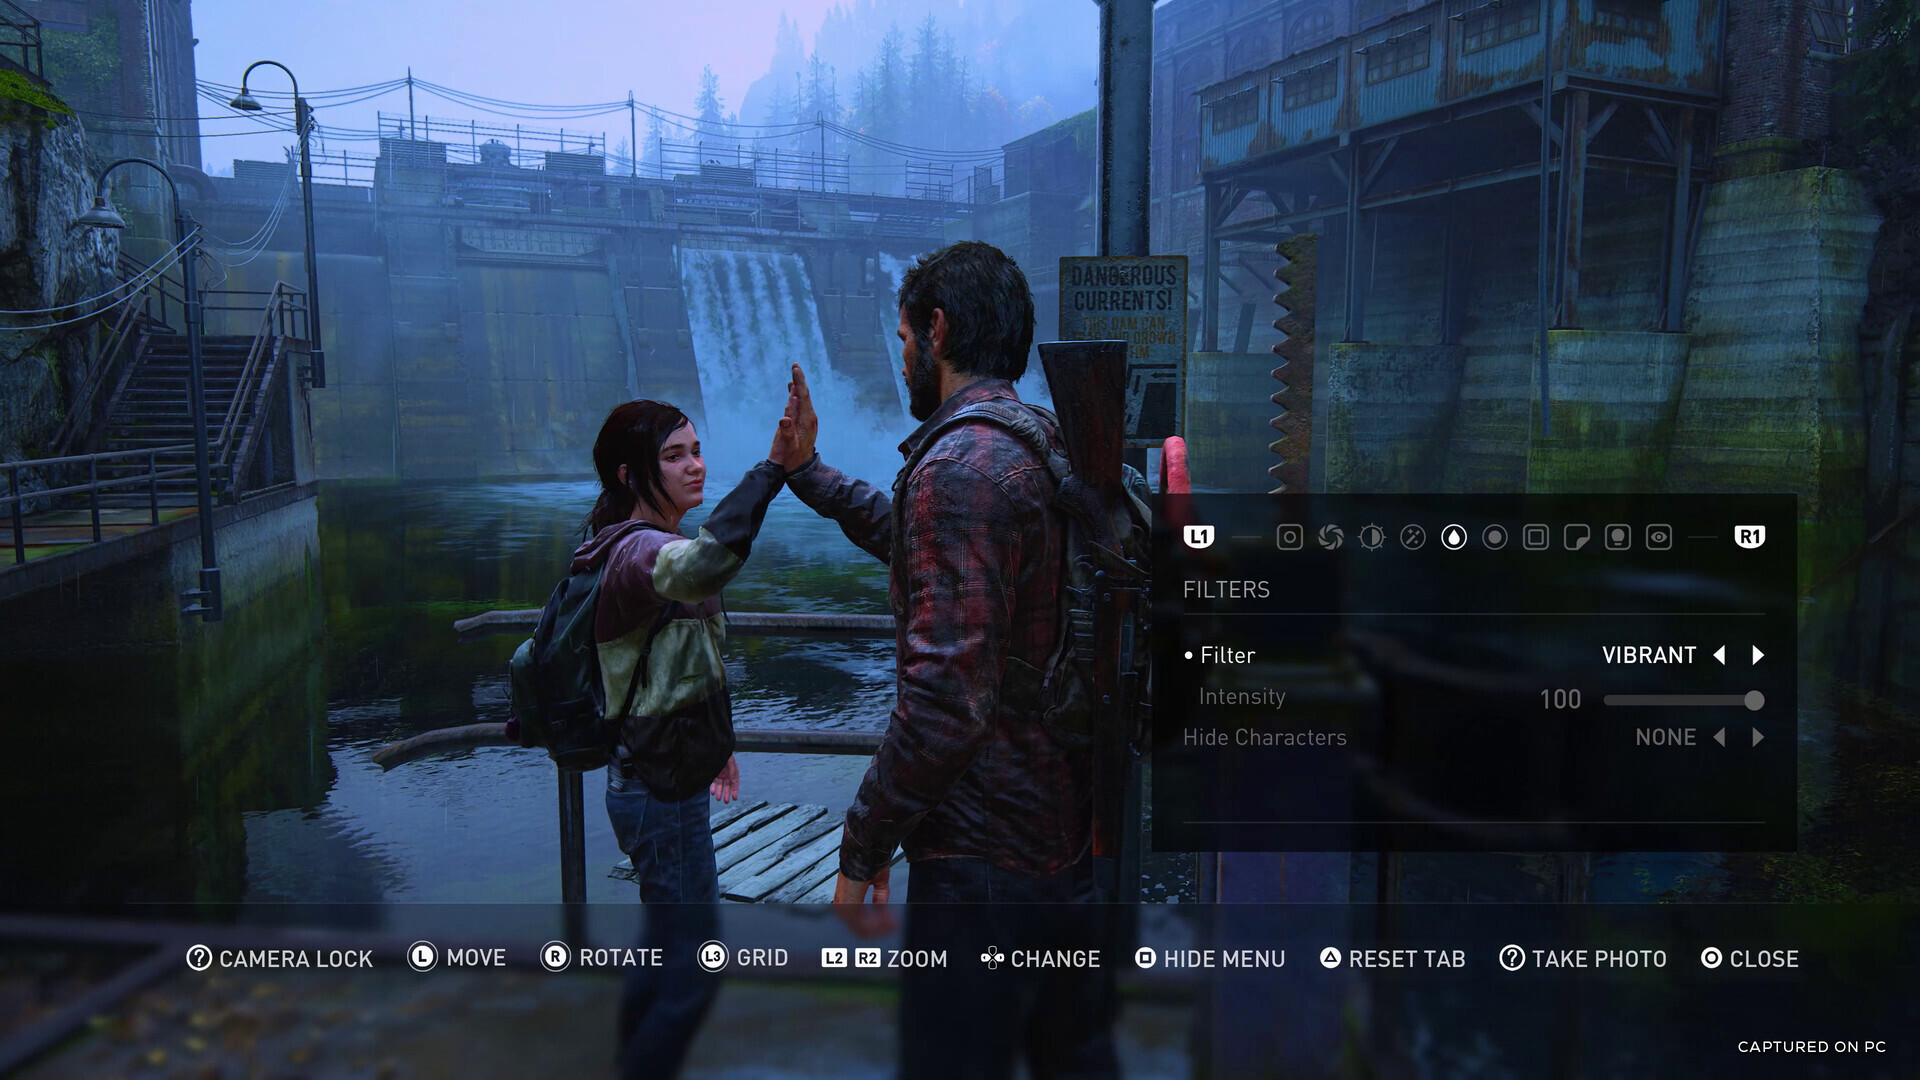 Buy The Last of Us Part I PC Steam key! Cheap price